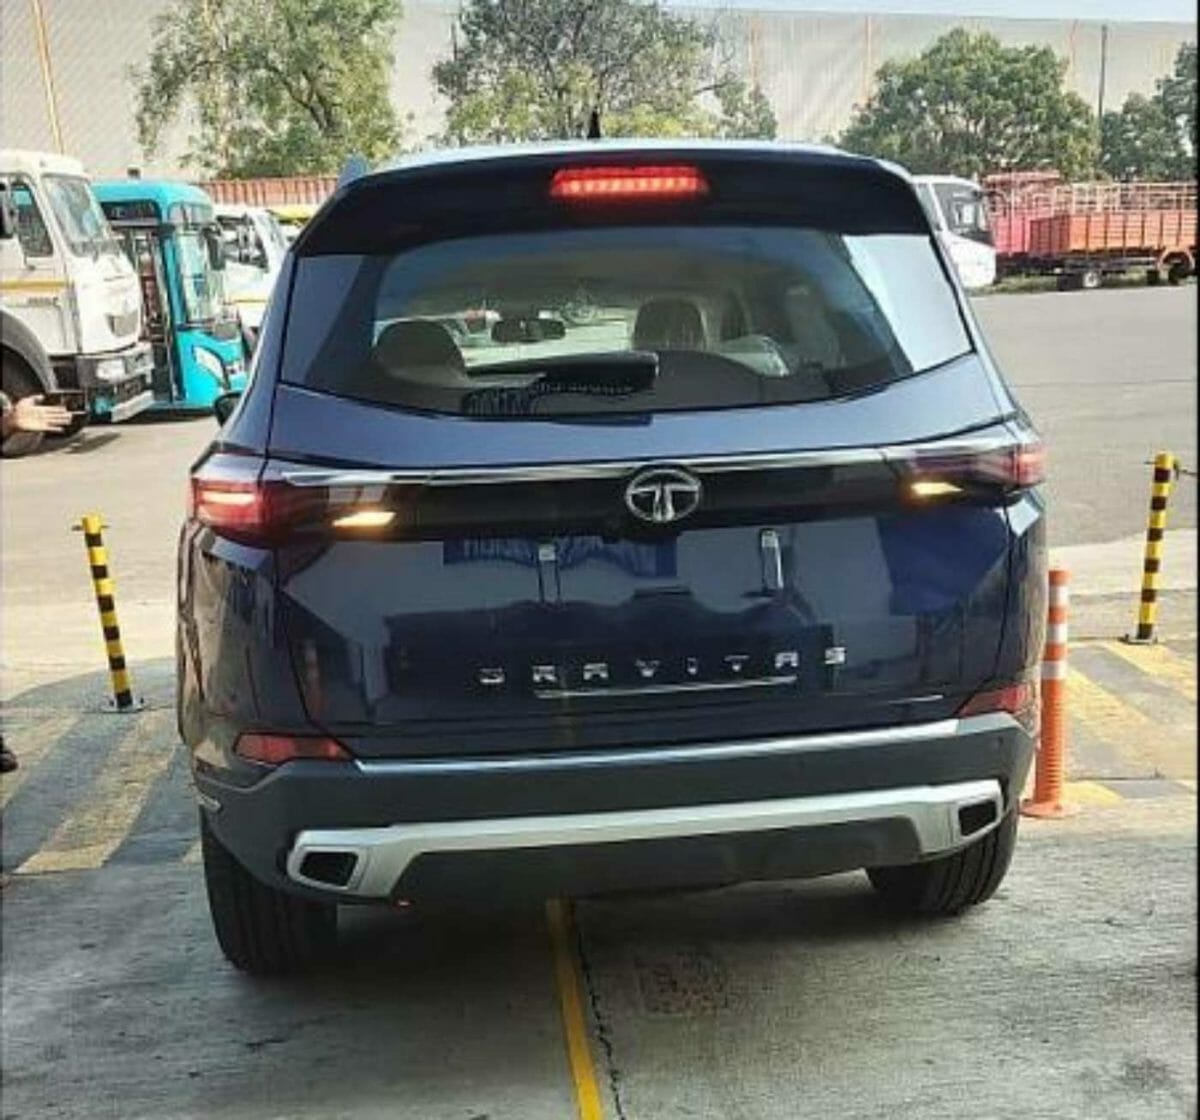 Tata Gravitas spied without camouflage